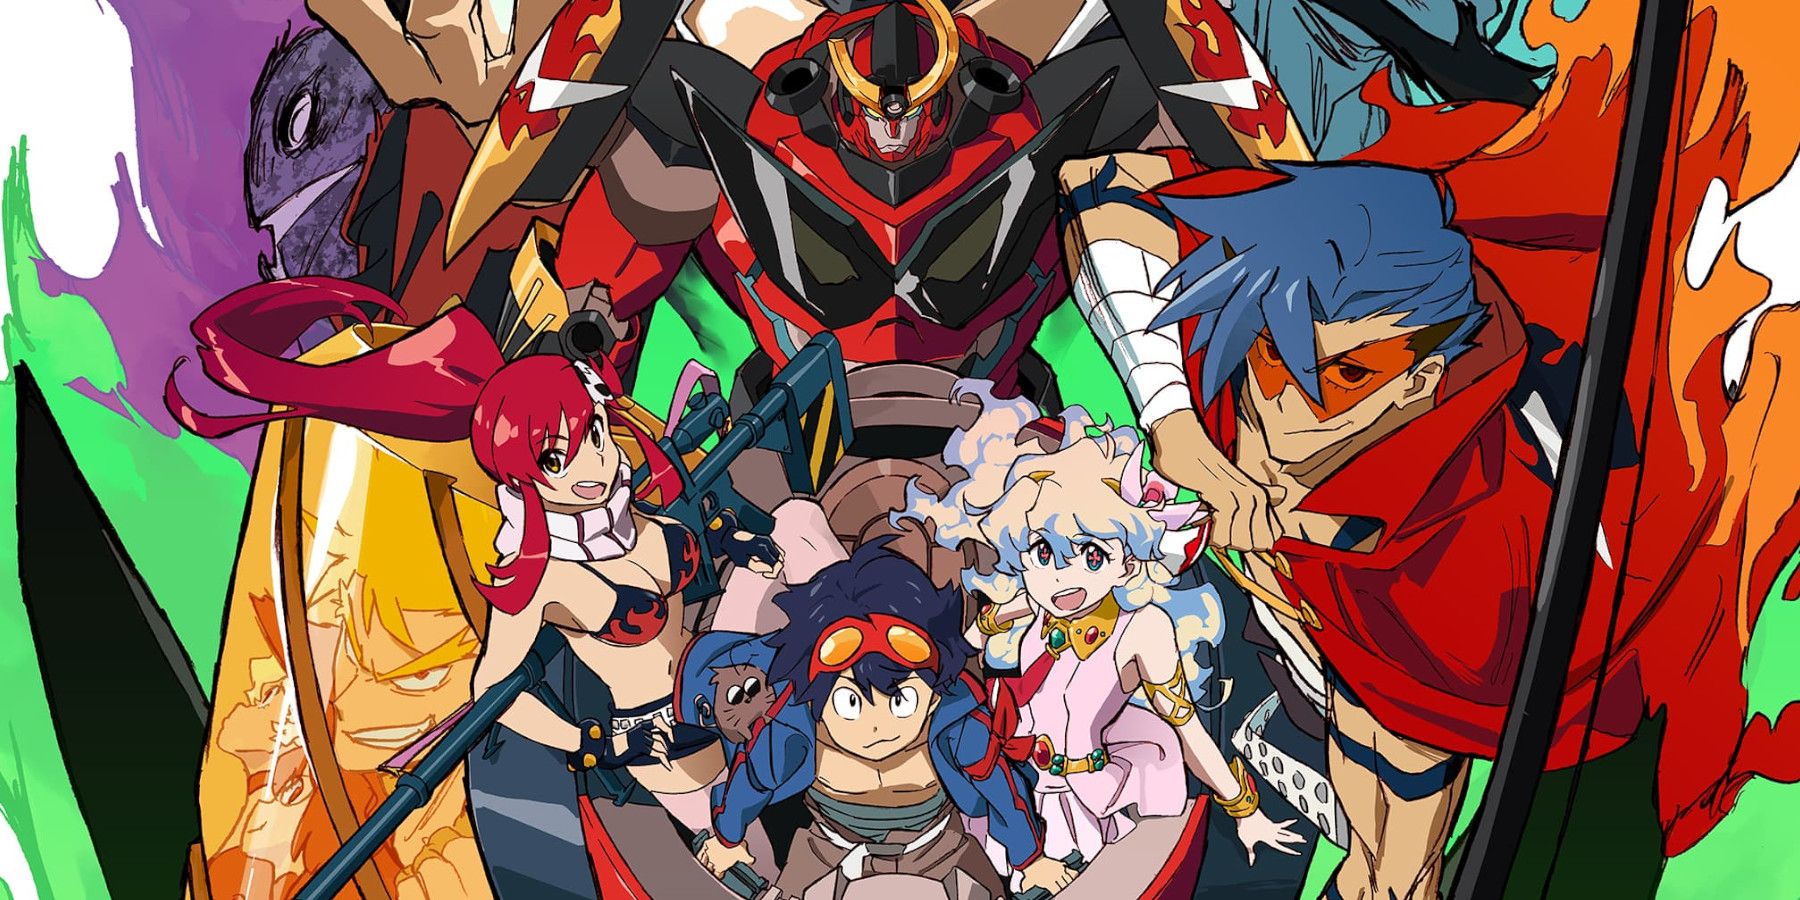 The Main Characters and mech Of Gurren Lagann